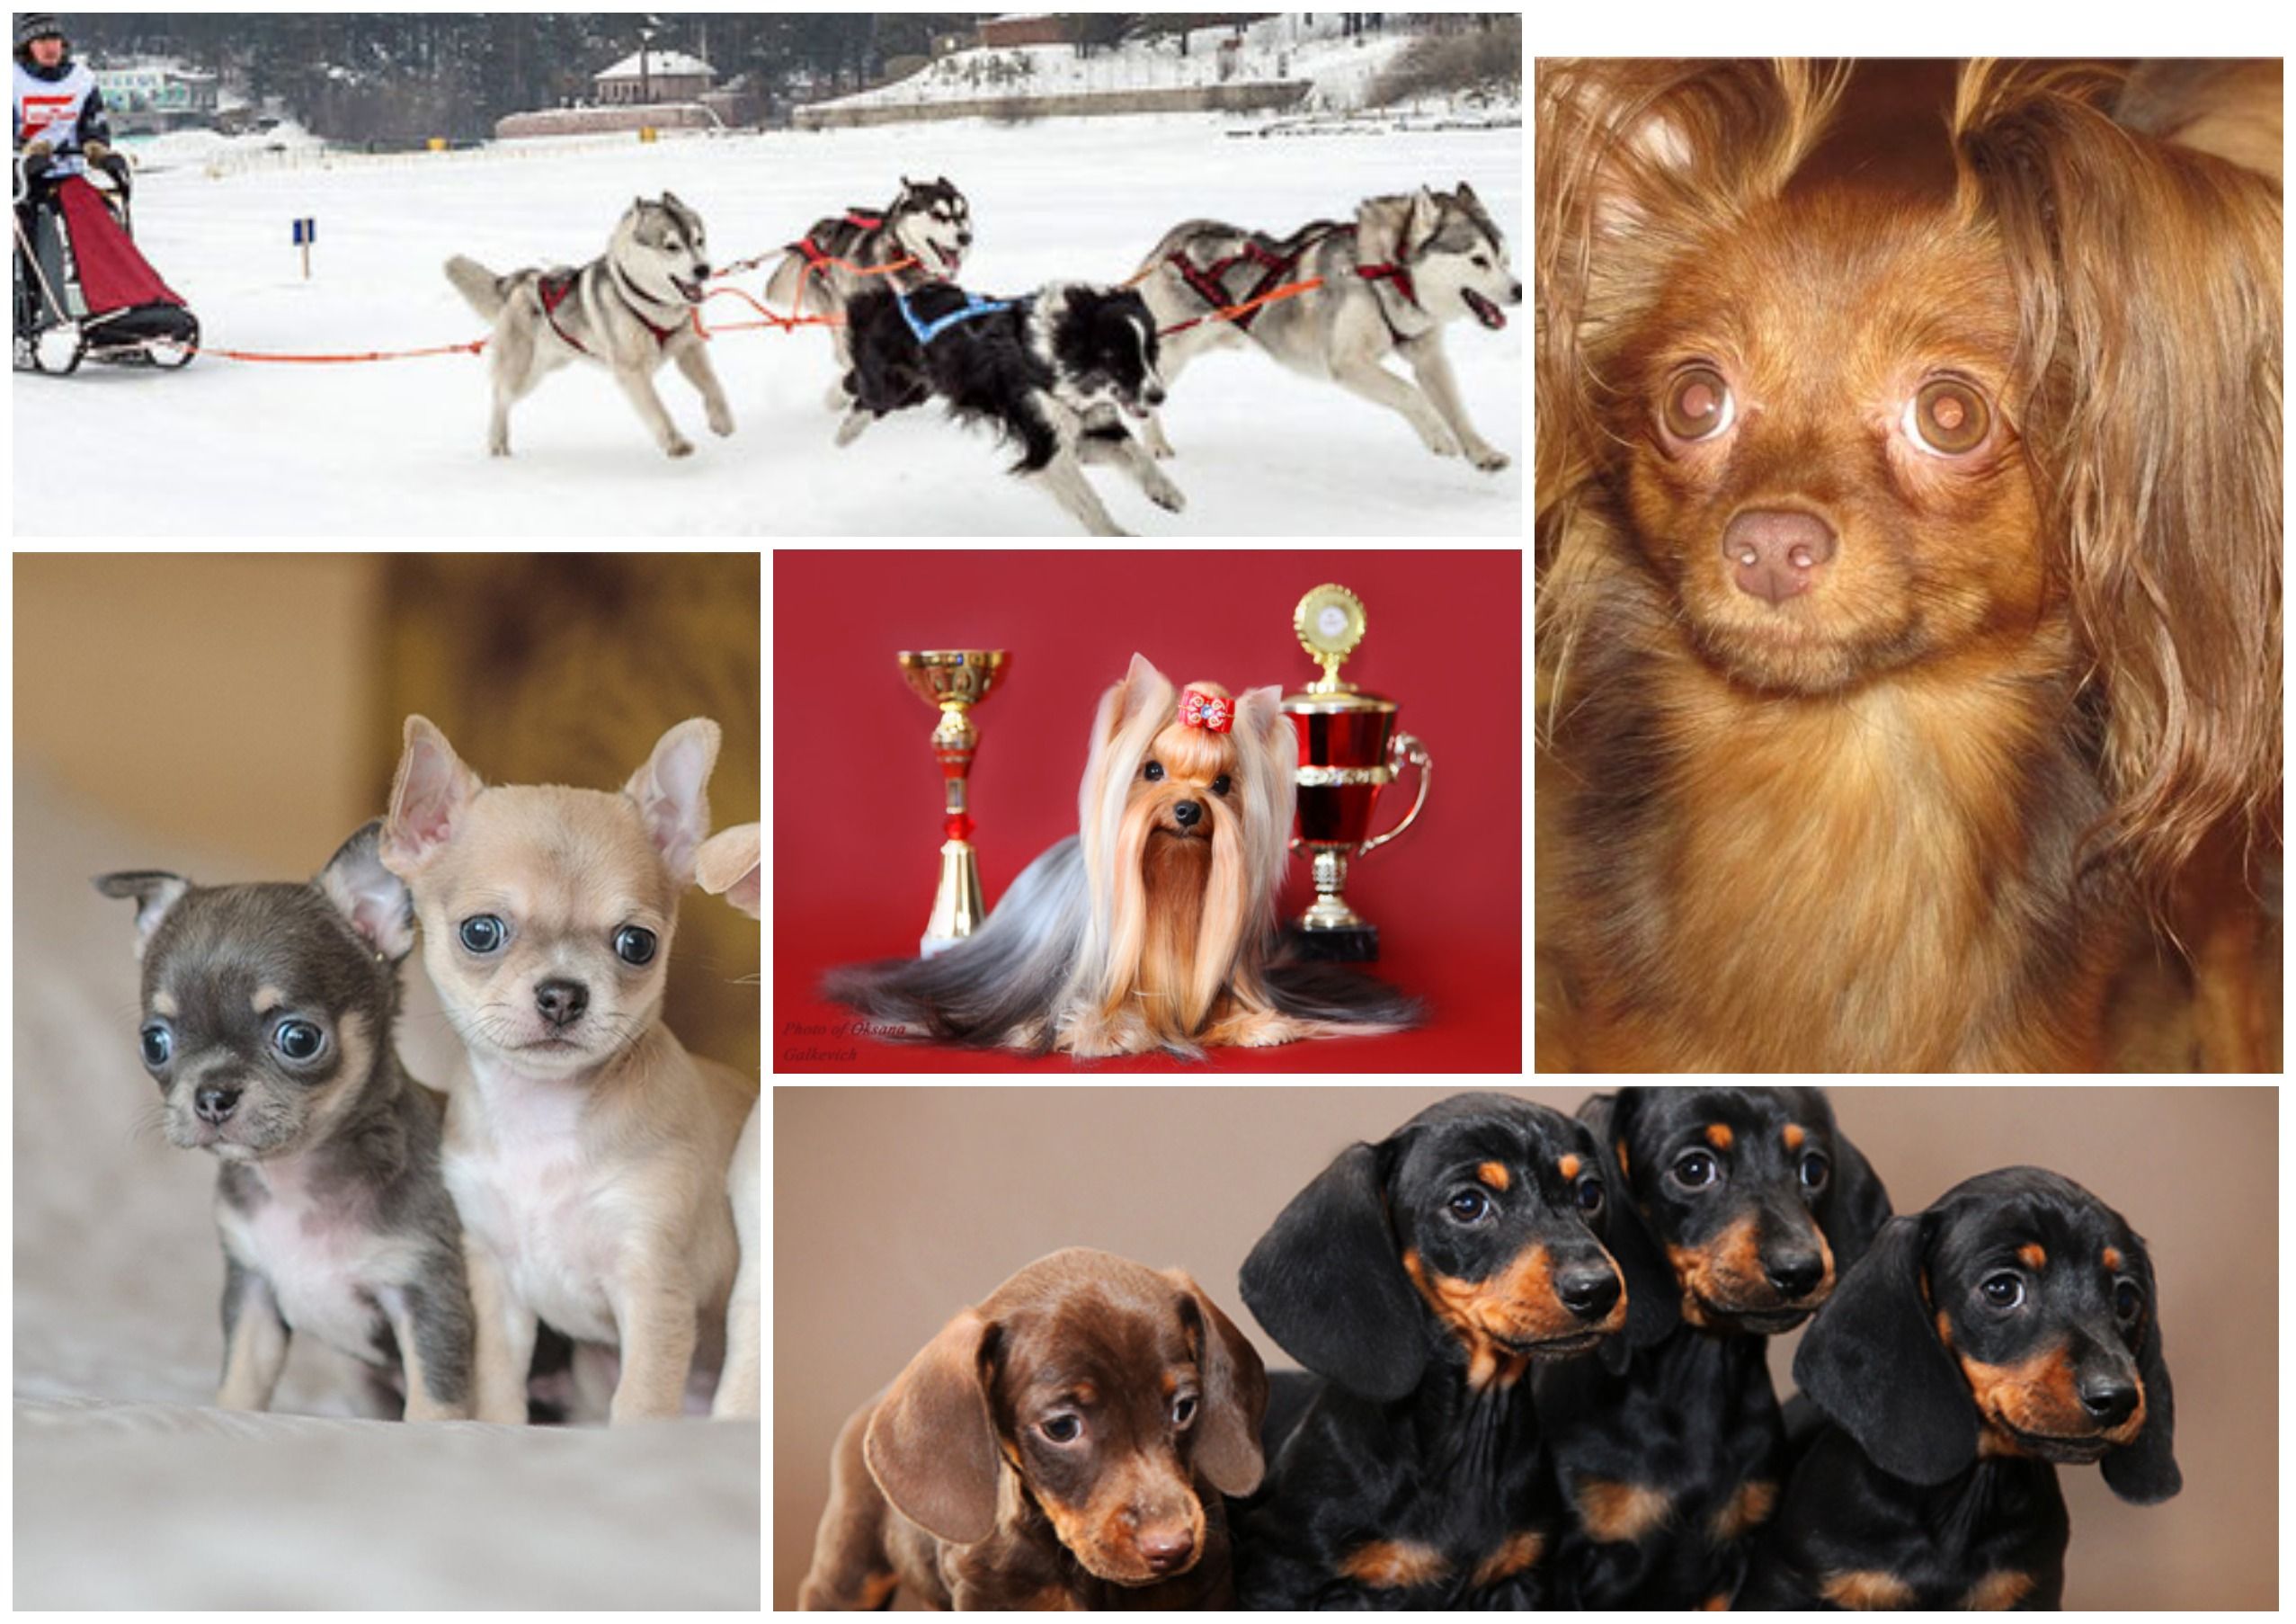 Where four-legged friends live: the best dog kennels in Omsk in 2022